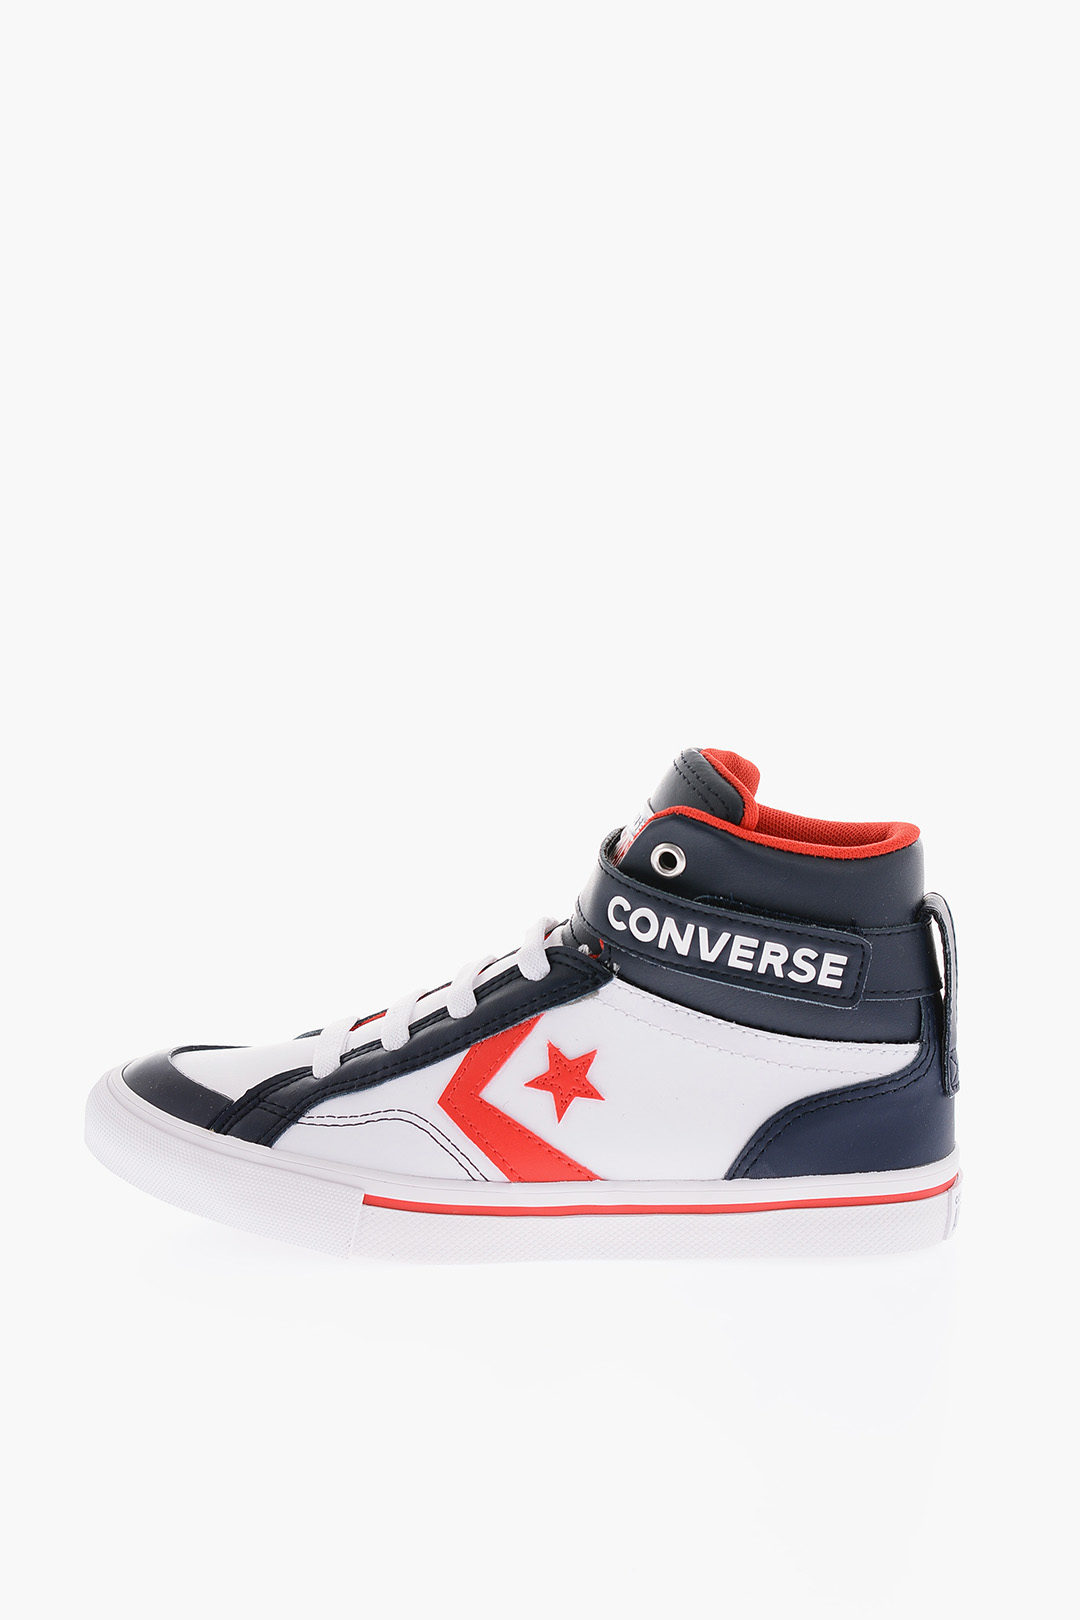 Converse KIDS ALL STAR Leather PRO BLAZE Sneakers children boys girls - Glamood Outlet